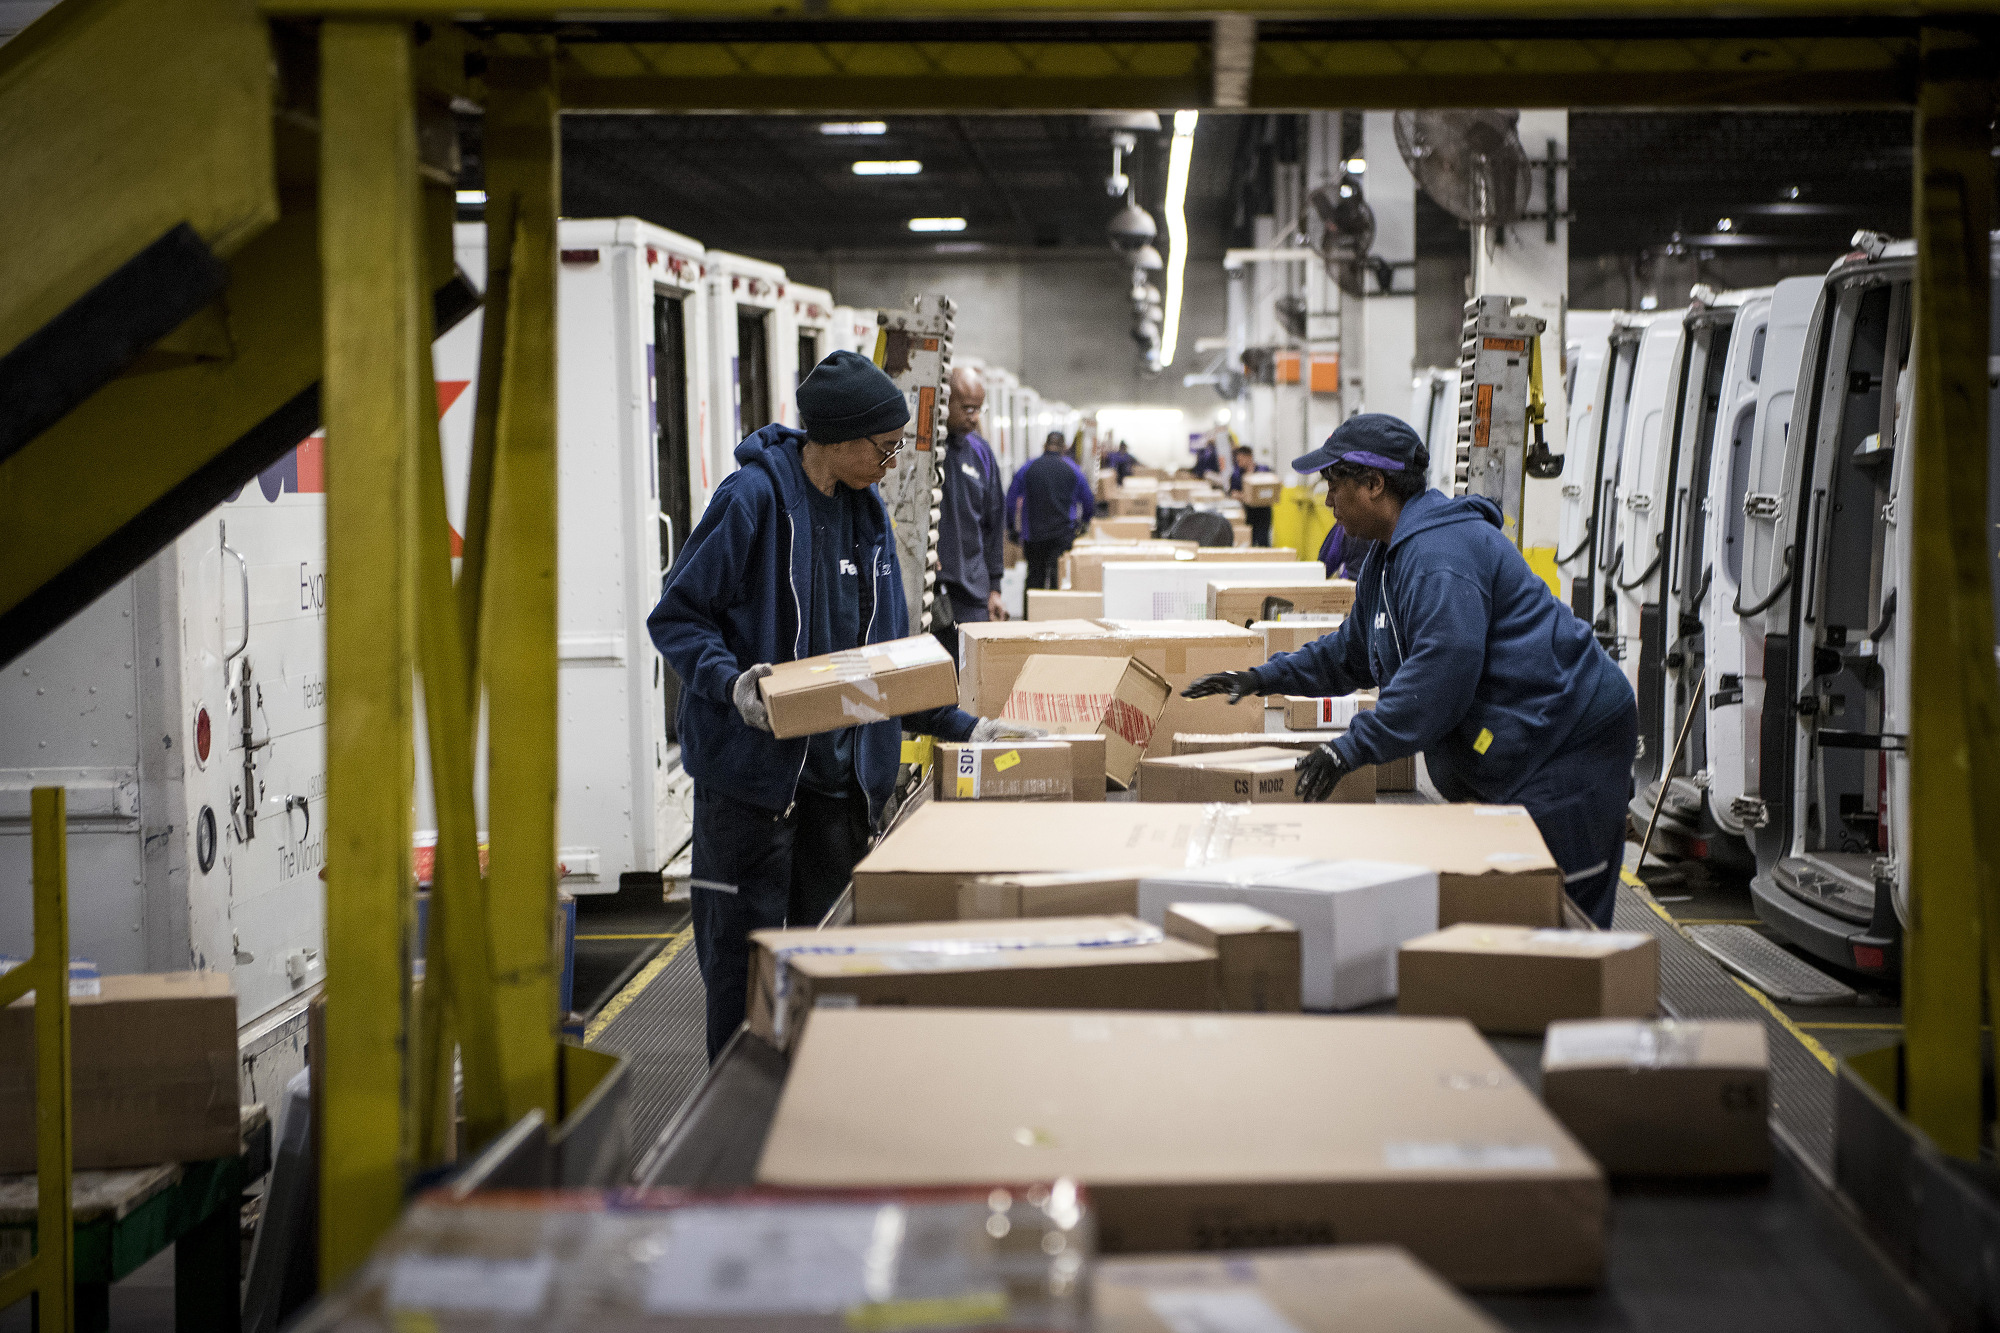 Employees sort packages for delivery at the FedEx Corp. shipping center in Chicago, Illinois,&nbsp;on&nbsp;Nov. 27, 2017.&nbsp;